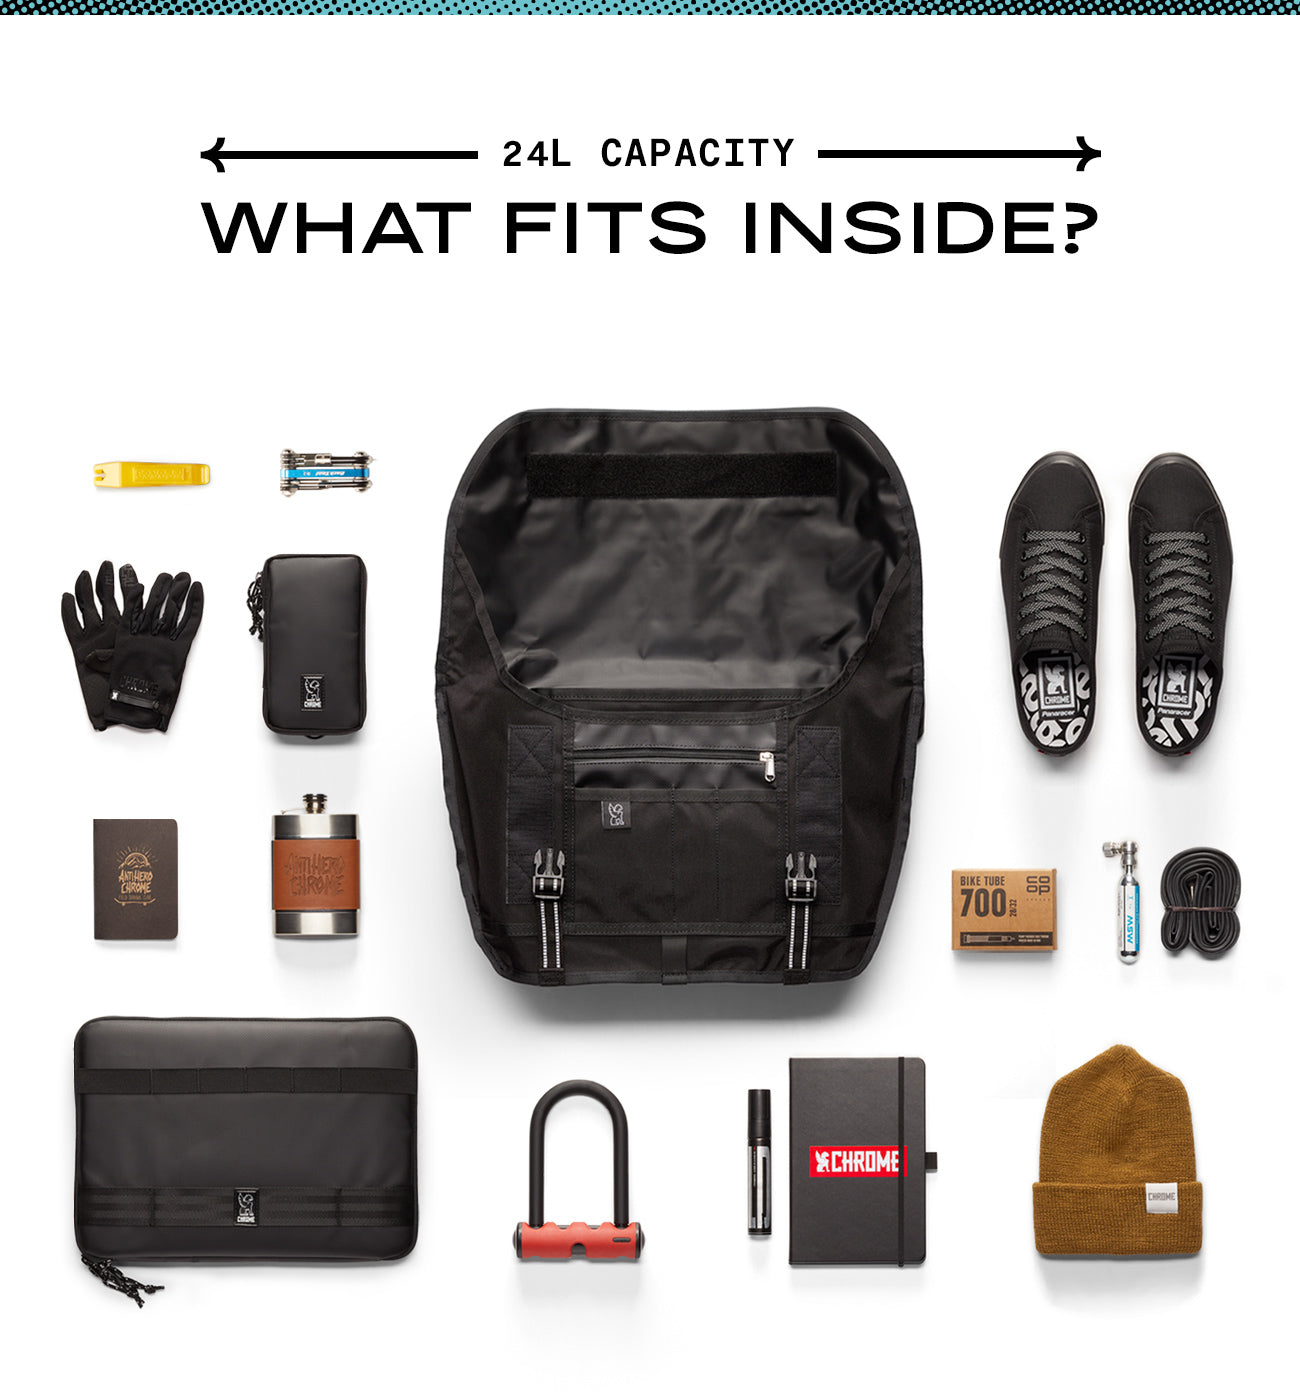 What's fits into the Citizen Messenger bag smaller image